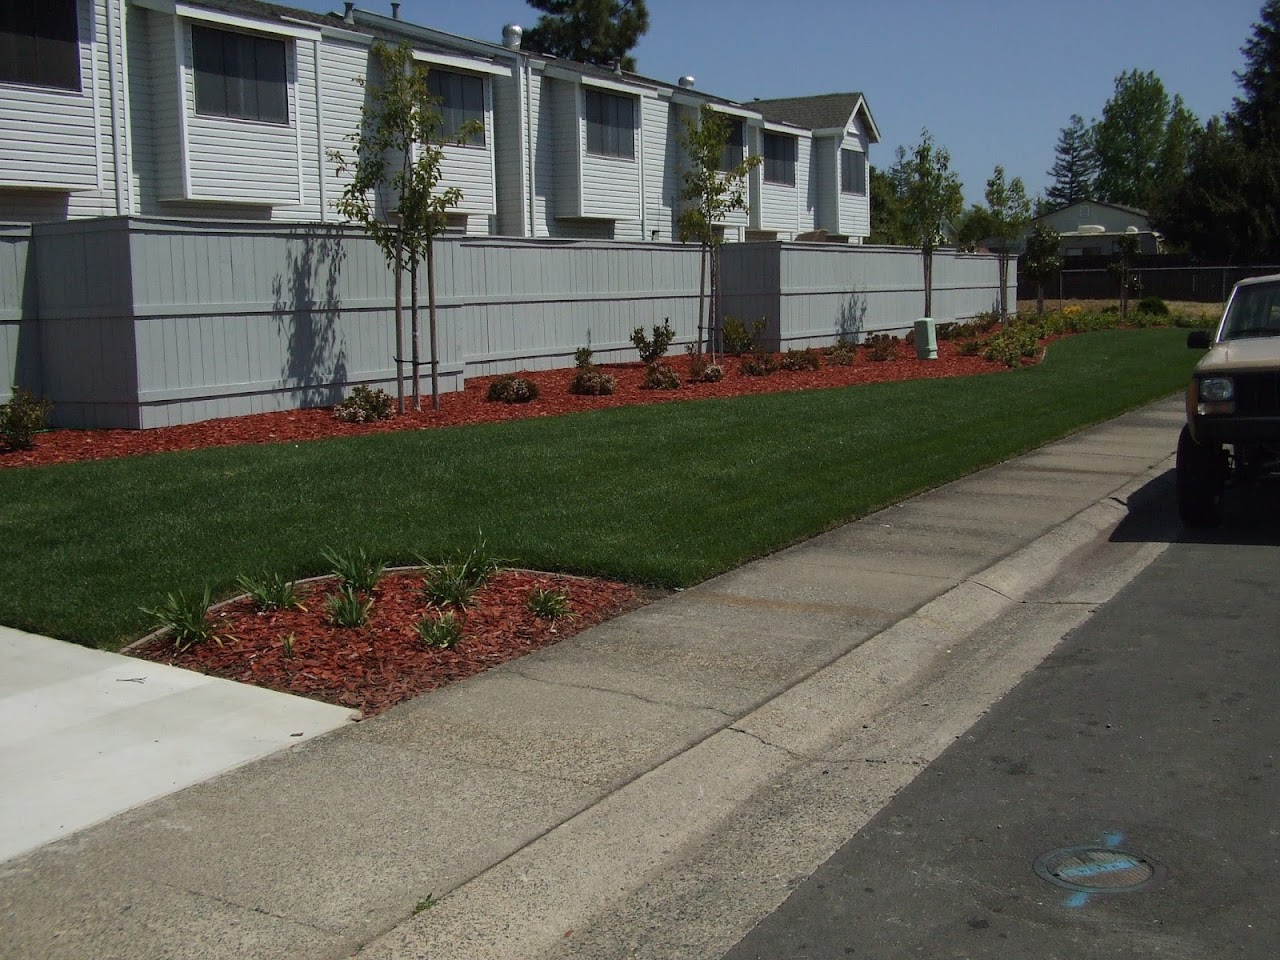 Photo of COLLEGE MANOR APTS. Affordable housing located at 4201 RACETRACK RD ROCKLIN, CA 95677